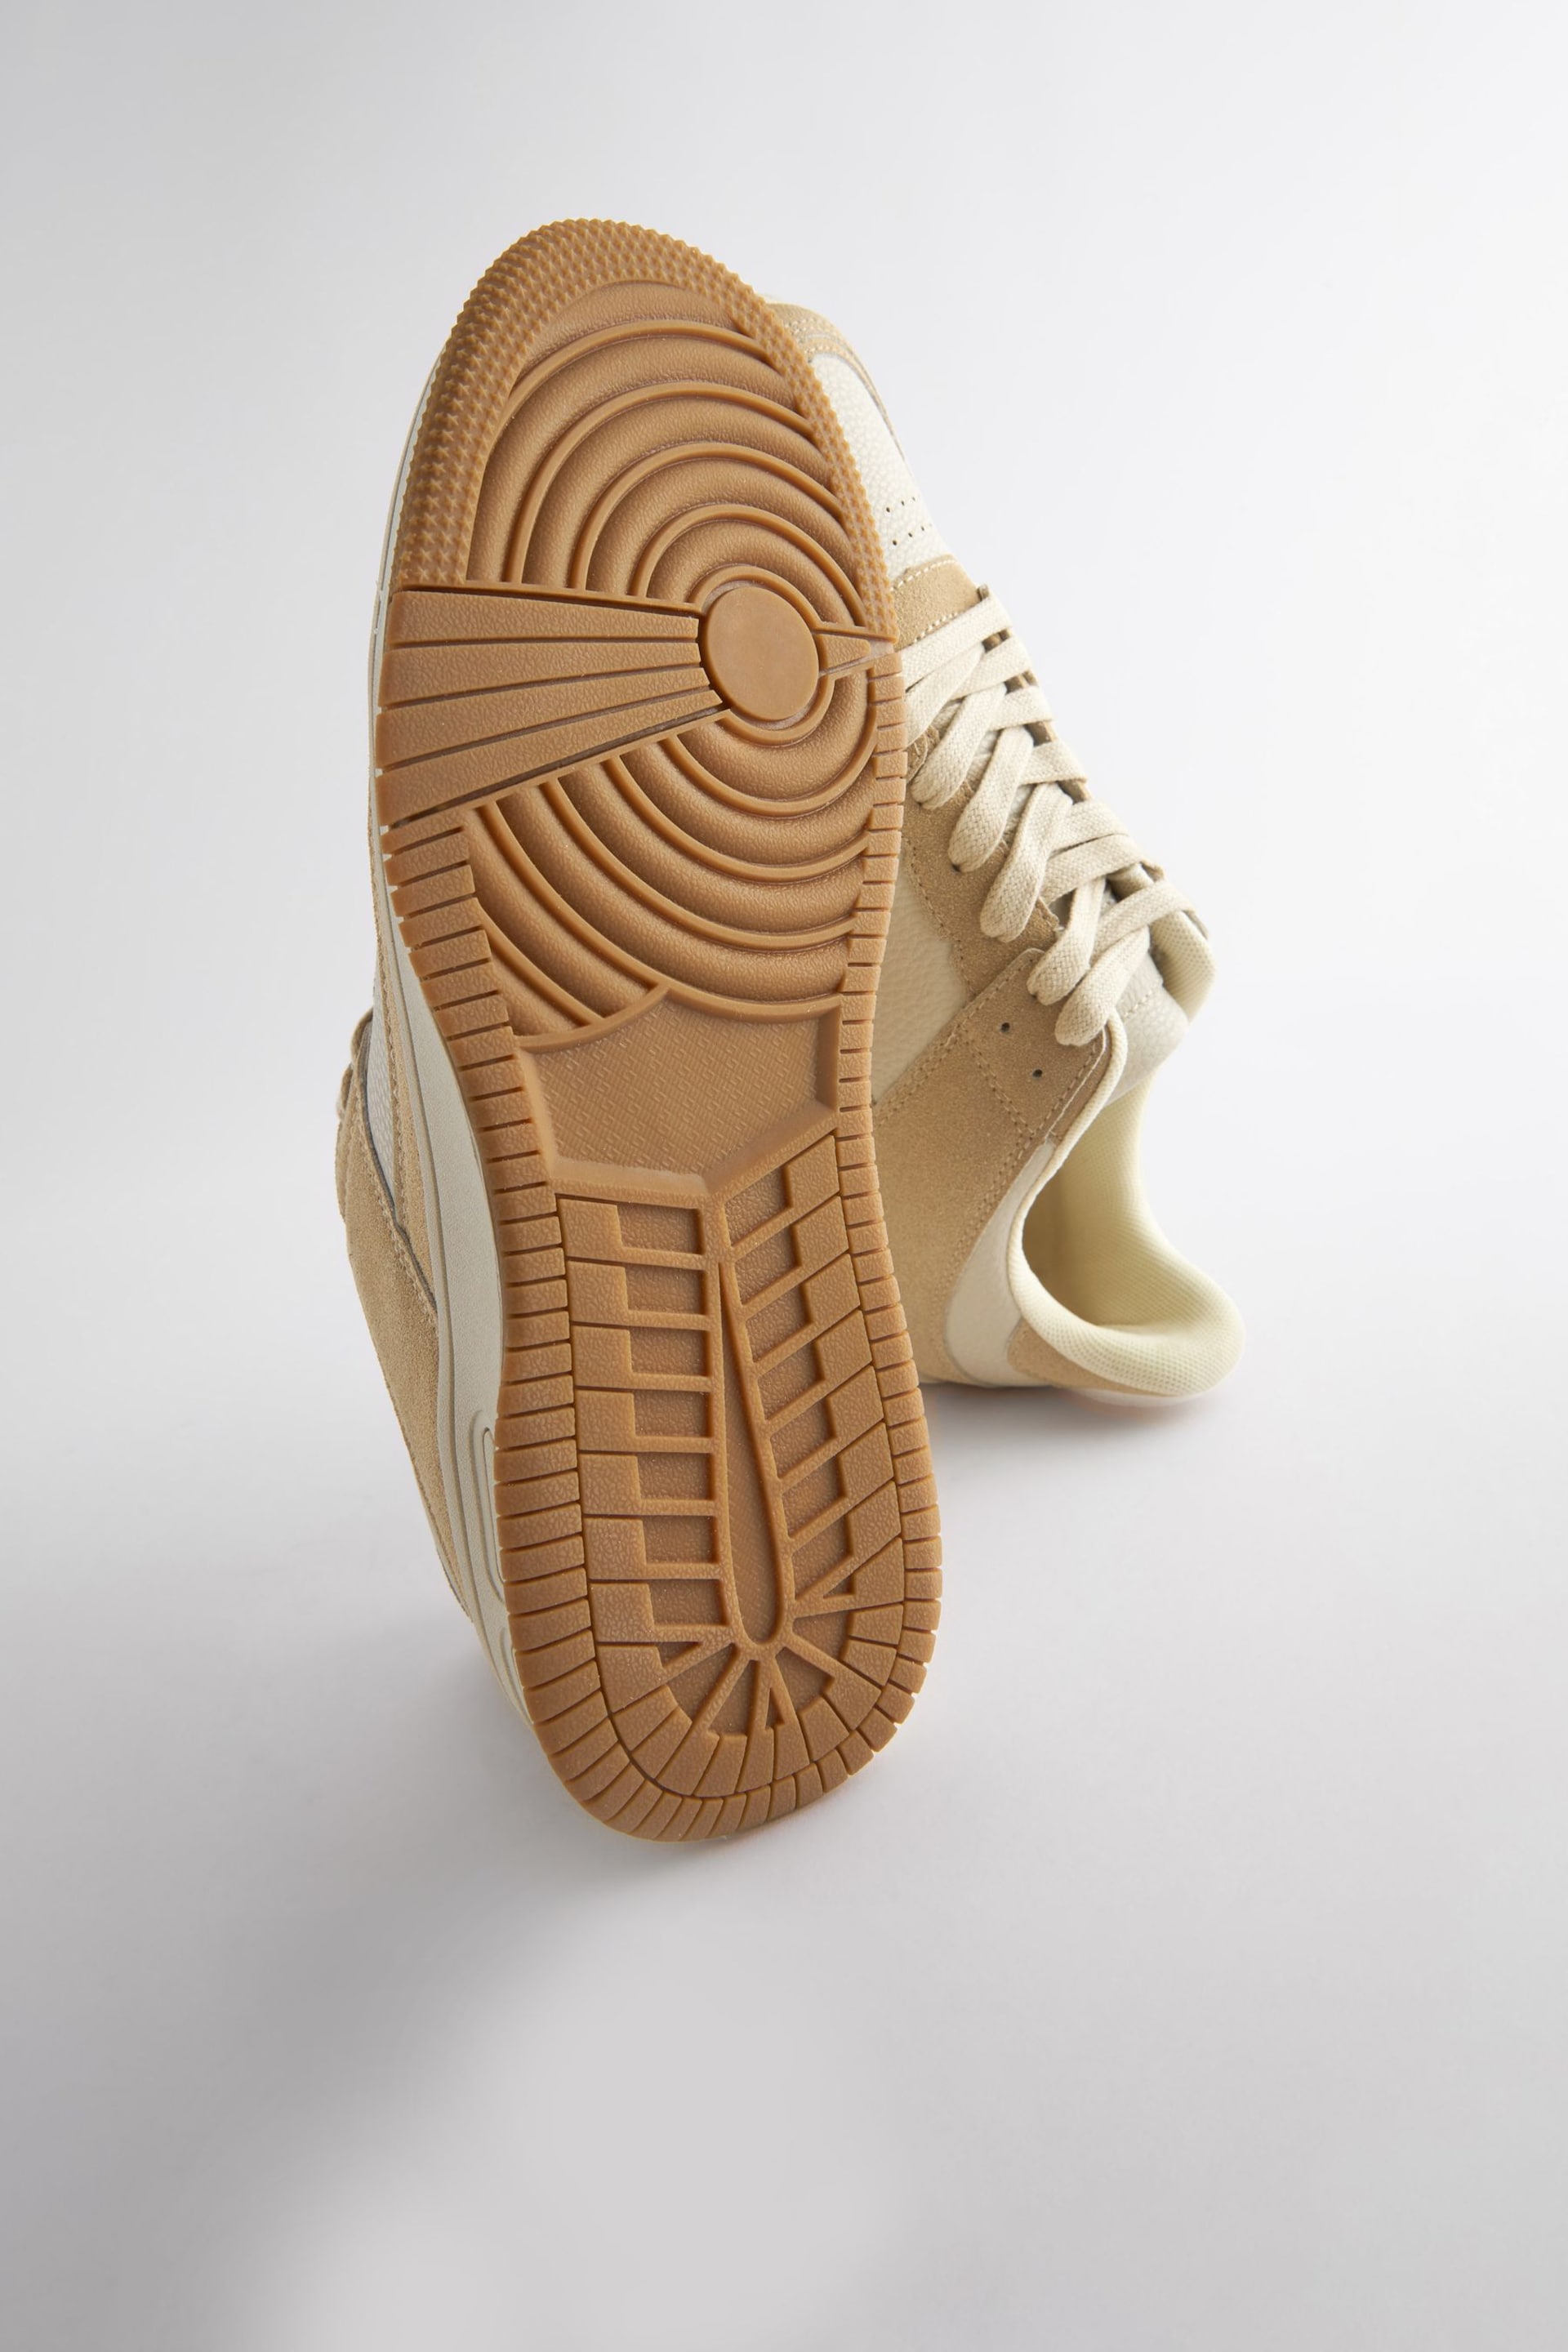 Natural EDIT Court Trainers - Image 4 of 6